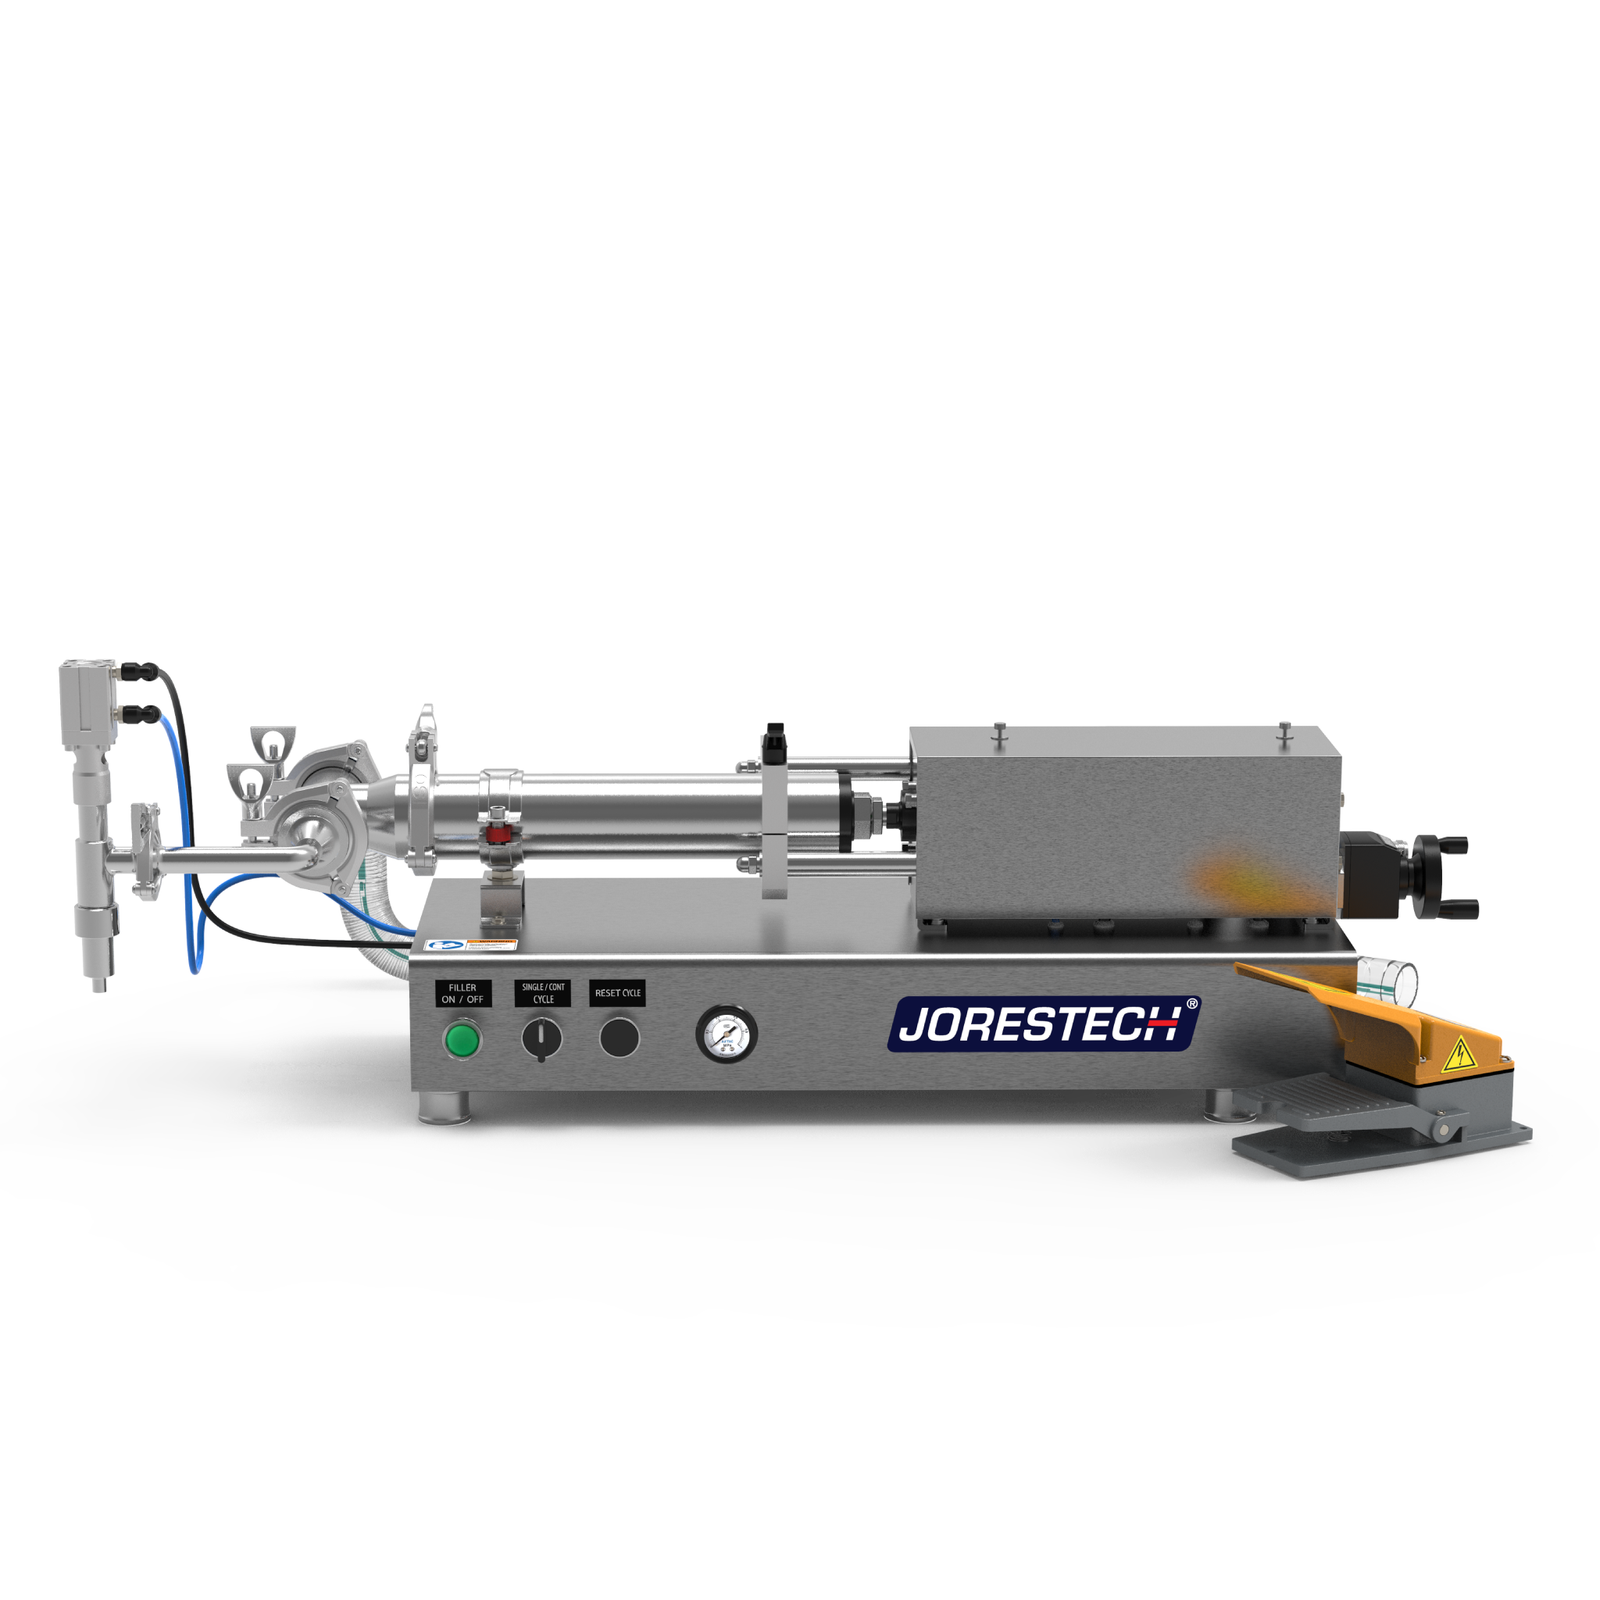 The stainless steel low viscosity Jorestech piston filling machine in a frontal view. The piston filler is made out of stainless steel and there's a yellow and grey foot pedal resting on the side.